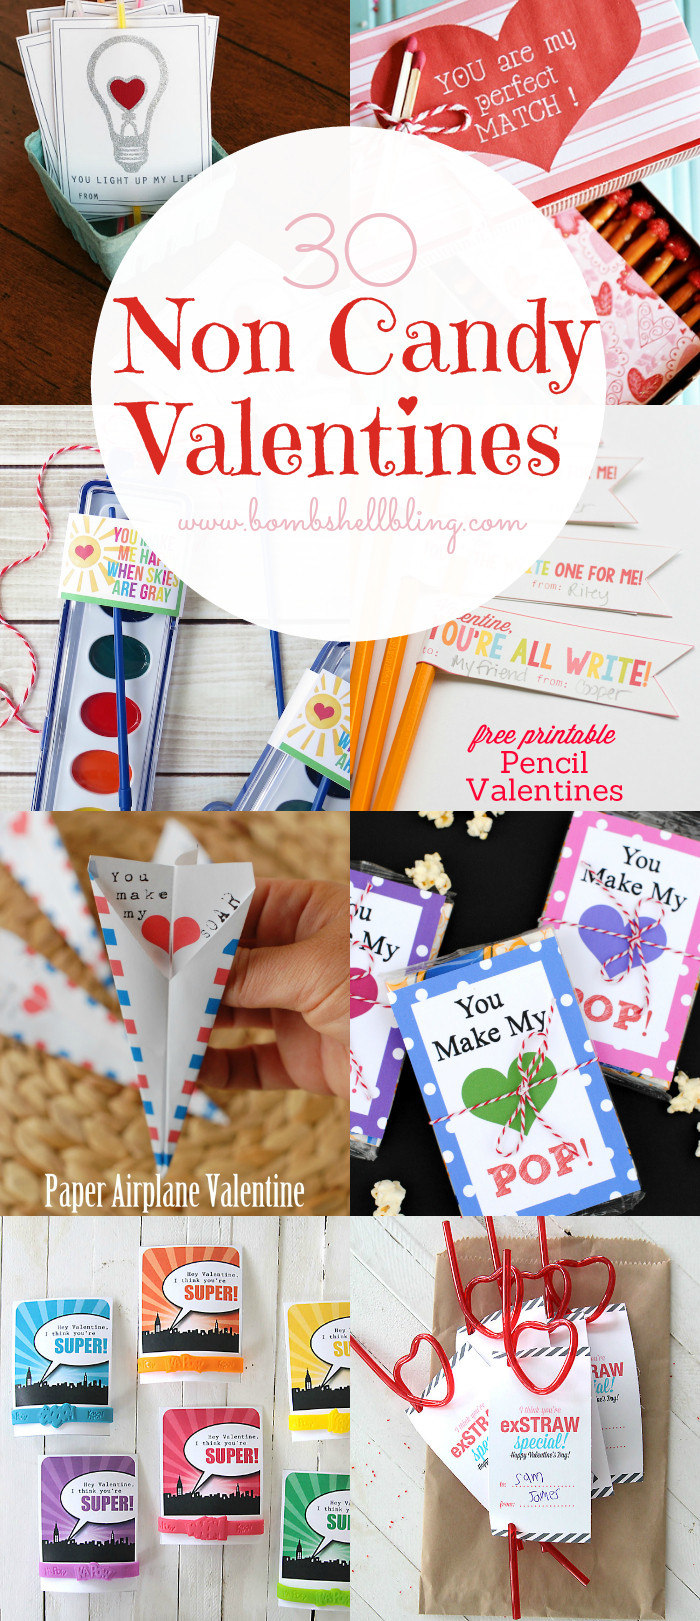 Valentine Gift Ideas For High School Girlfriend
 Non Candy Valentine Ideas & Printables Over 30 to Choose From